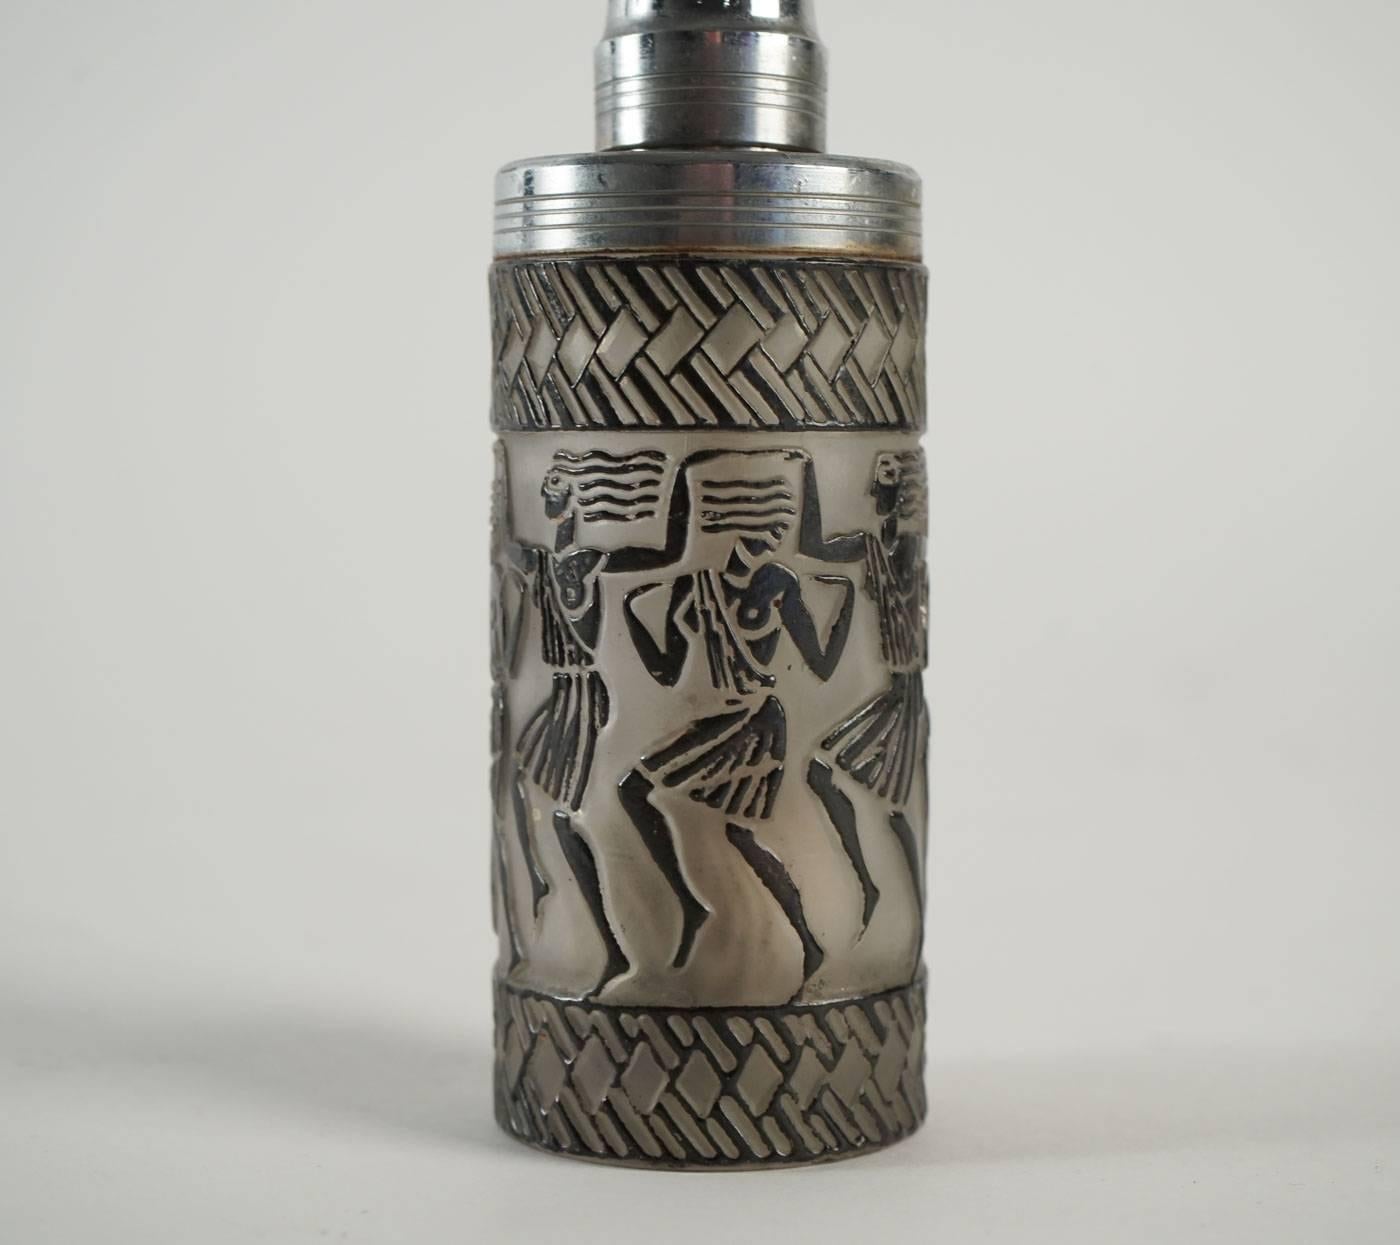 Danseuses Egyptiennes perfume burner: frosted and enameled Egyptian dancers theme glass under a metal top and cap model: Marcas-Et-Bardel-Perfume-Burner-1, circa 1926.